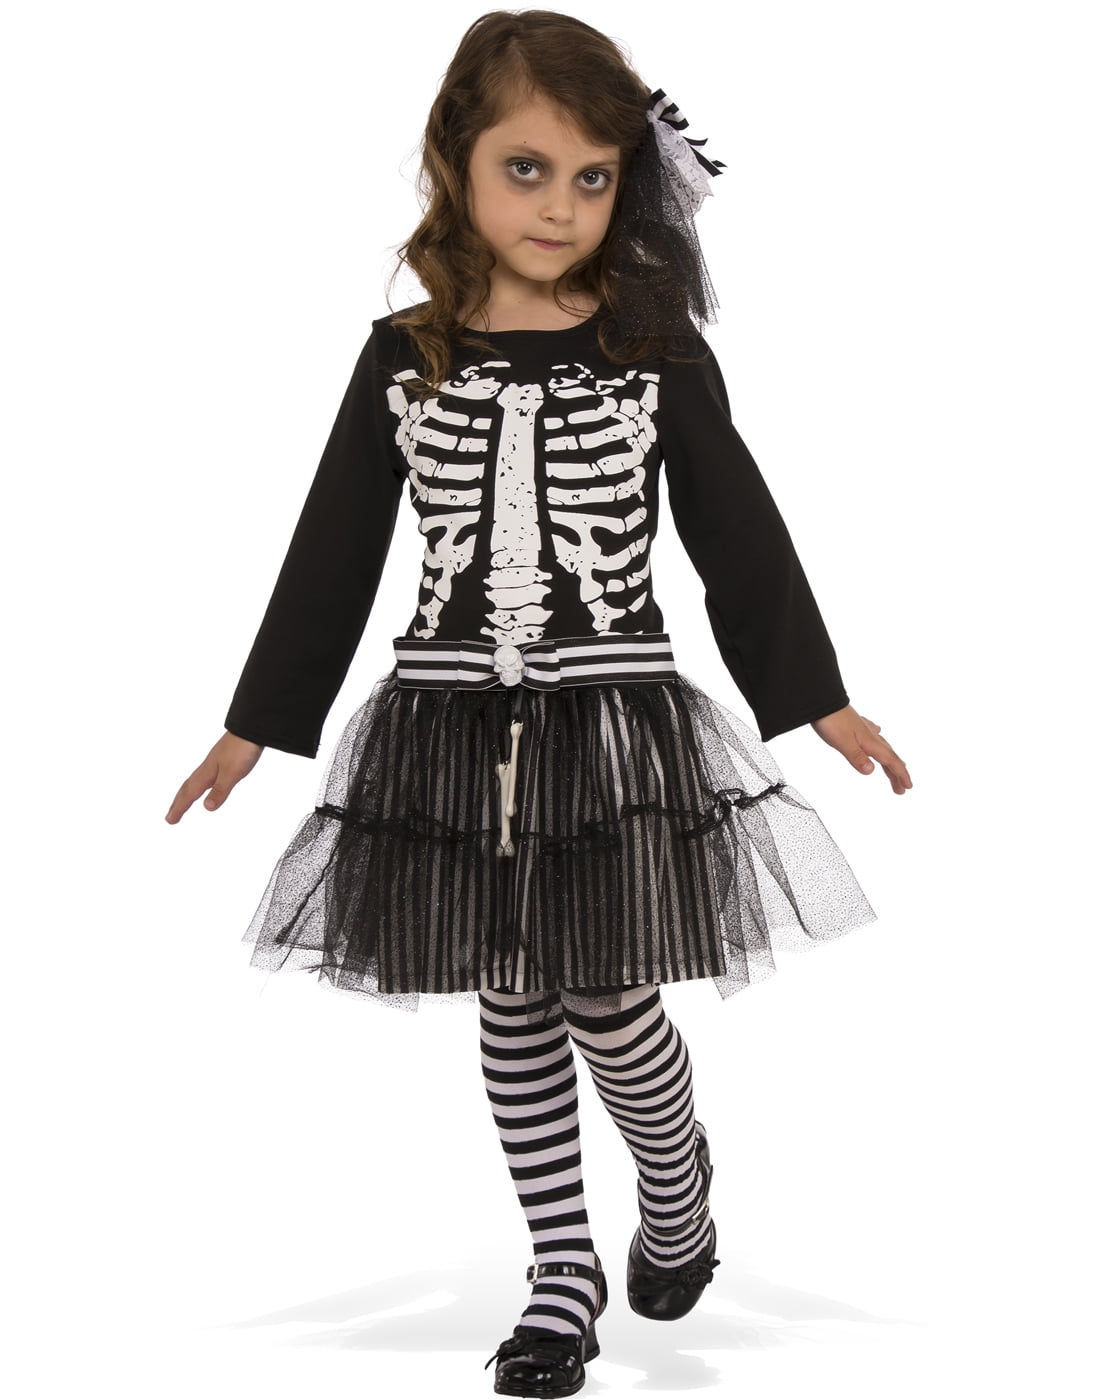 Toddler Girls Boys Cute Skeleton All In One Halloween Fancy Dress Party Costume 